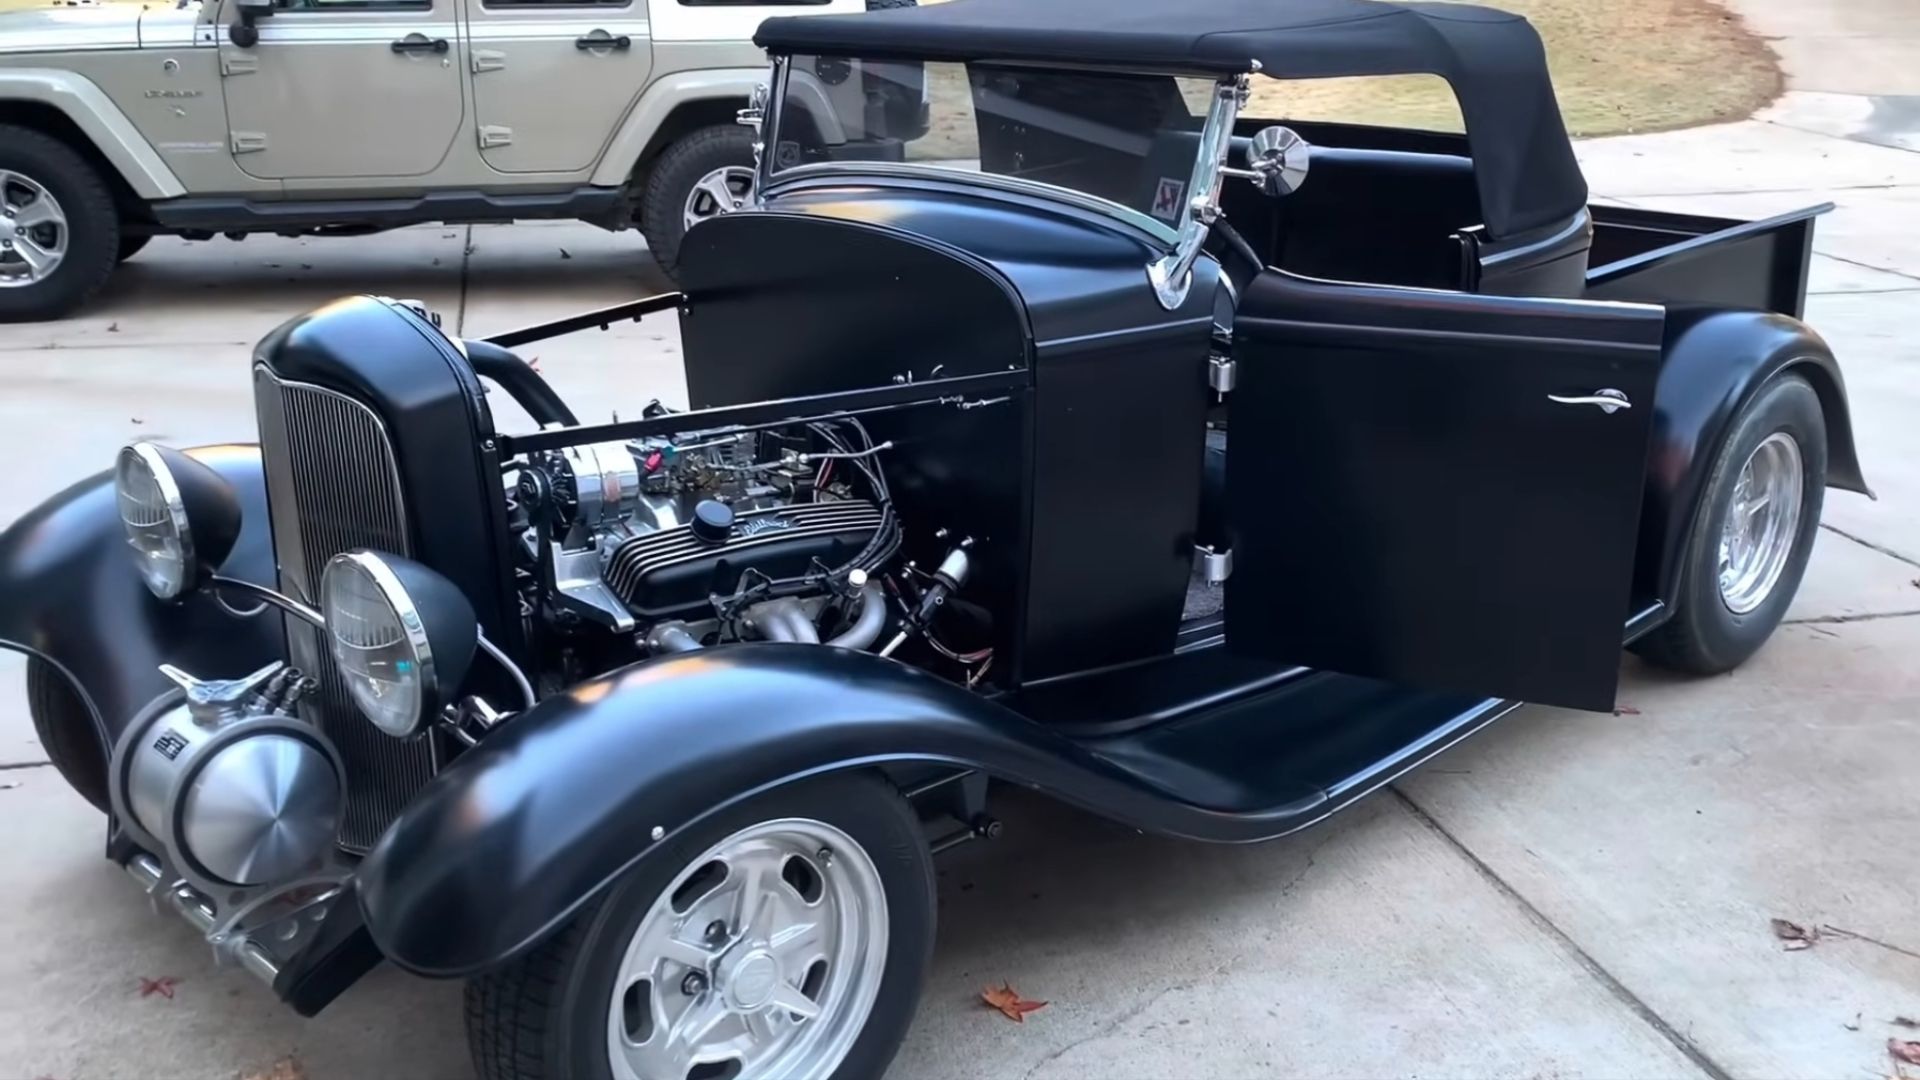 A 15 Year Old Hot Rod In A Front Quarter View